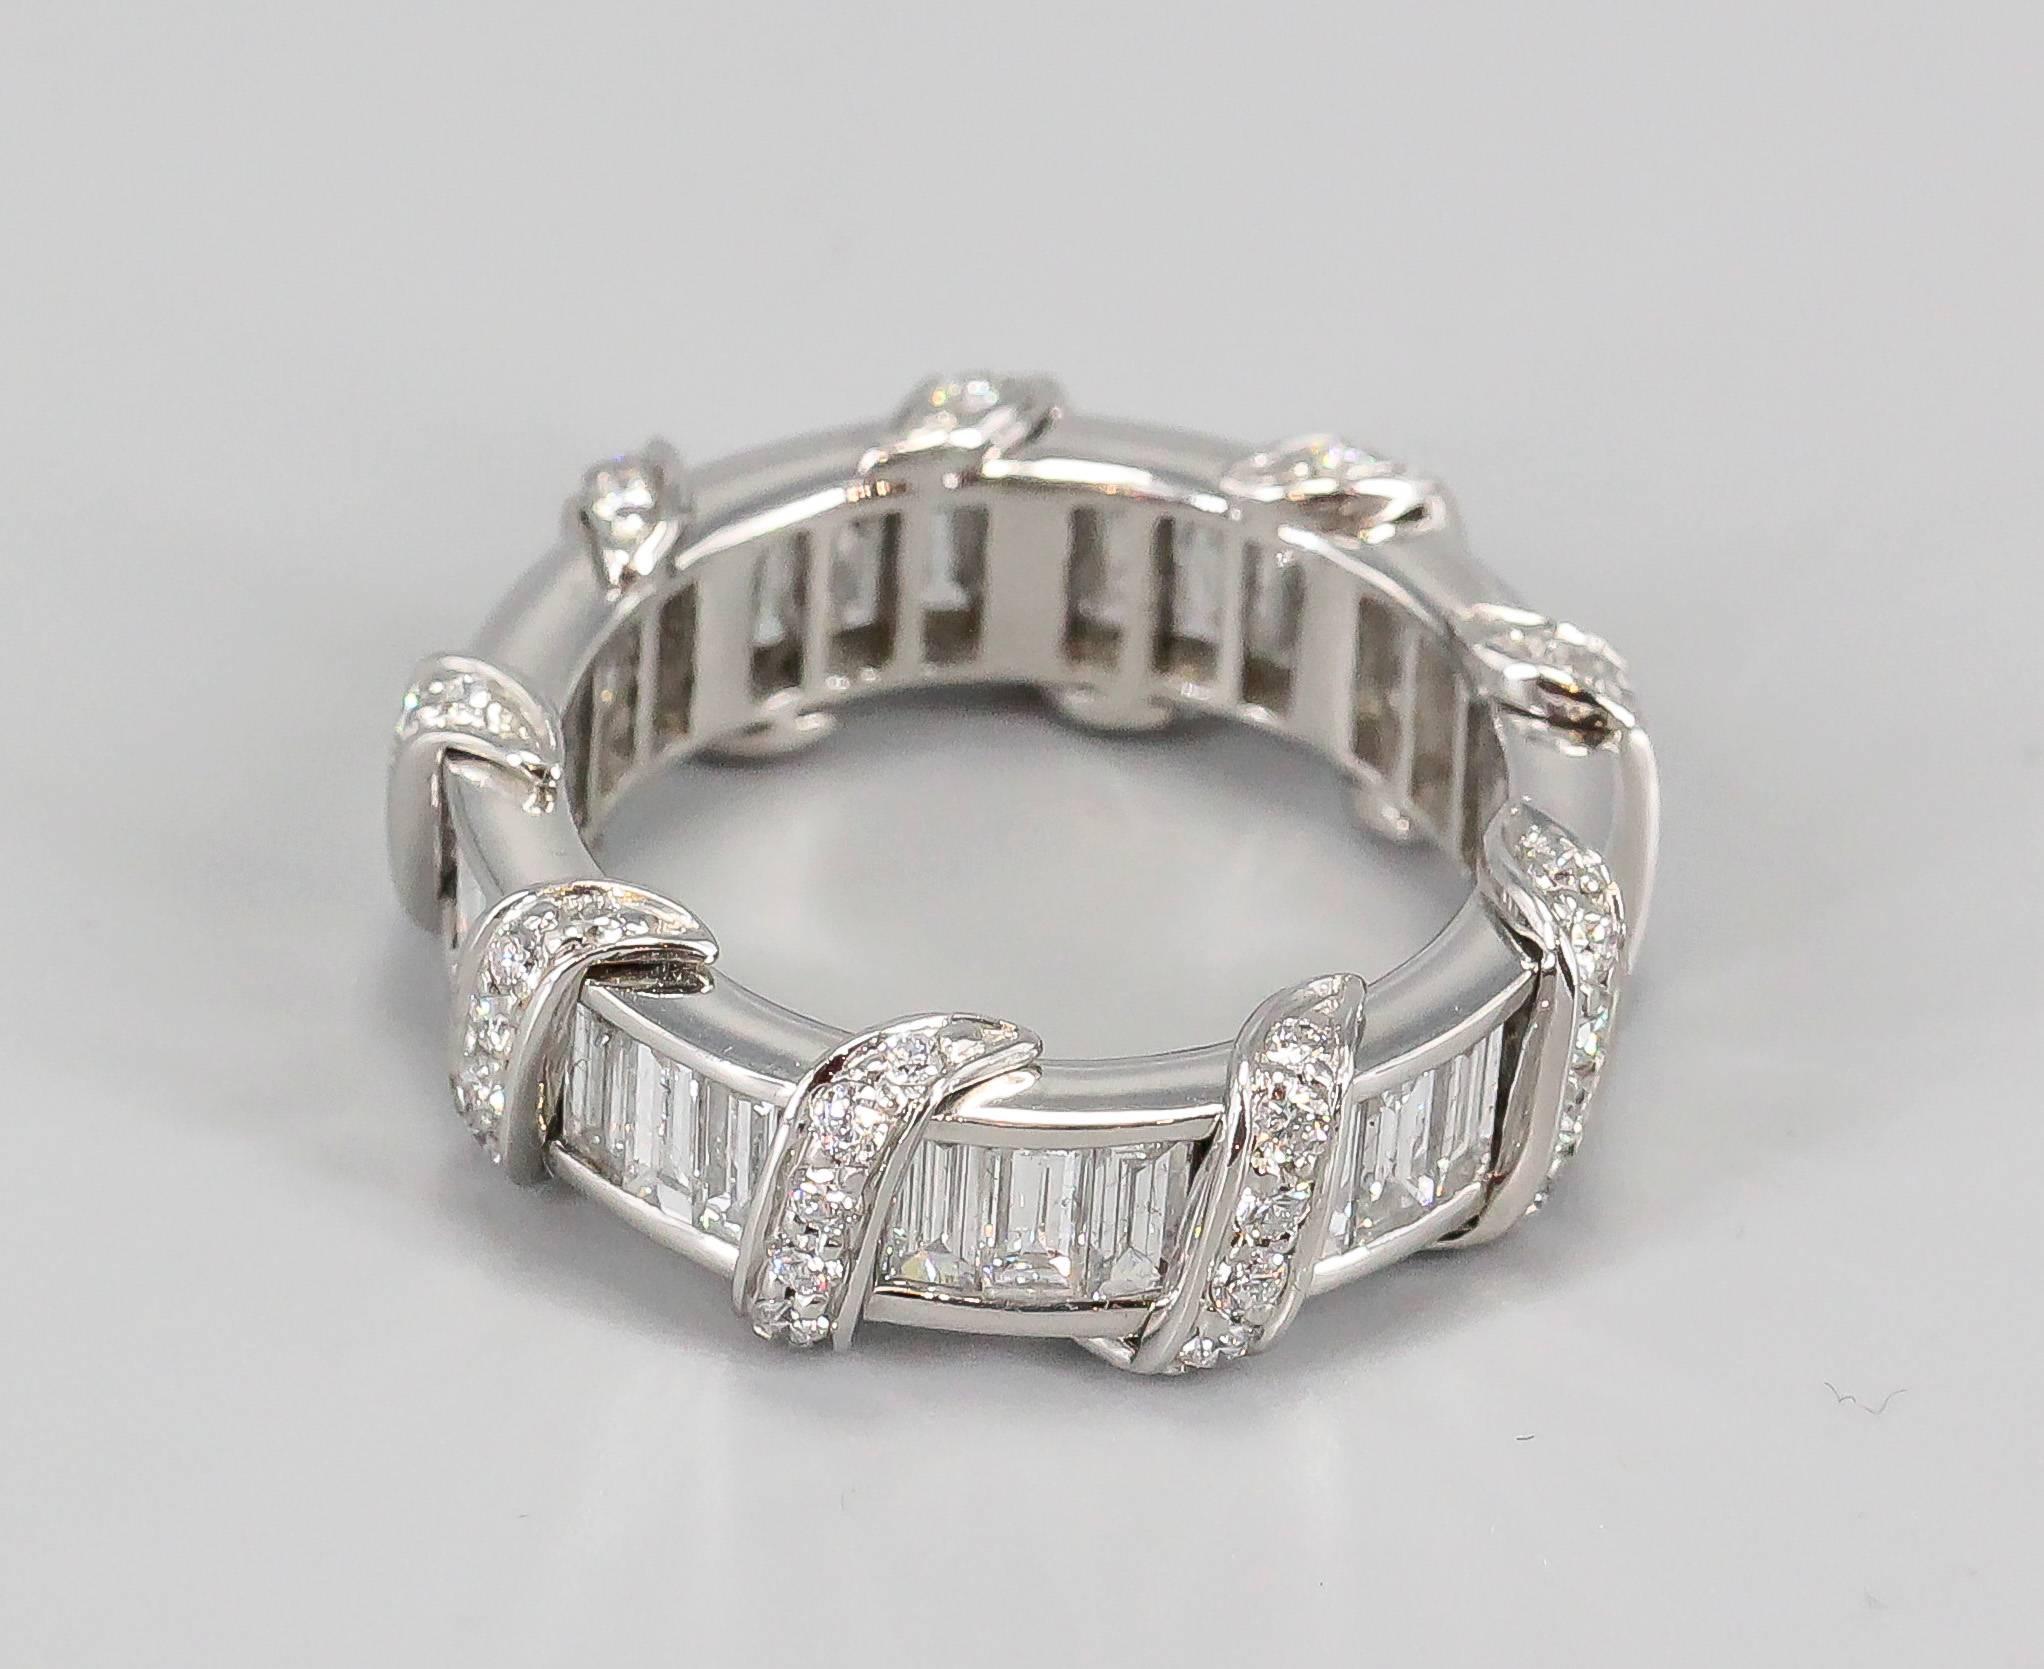 Timeless and chic diamond and platinum band by Verdura. It features high grade round and baguette cut diamonds throughout. Highly ornate and beautifully made. Perfect for day or evening. Approx. retail price $29500.
Approx. size 6.5.

Hallmarks: